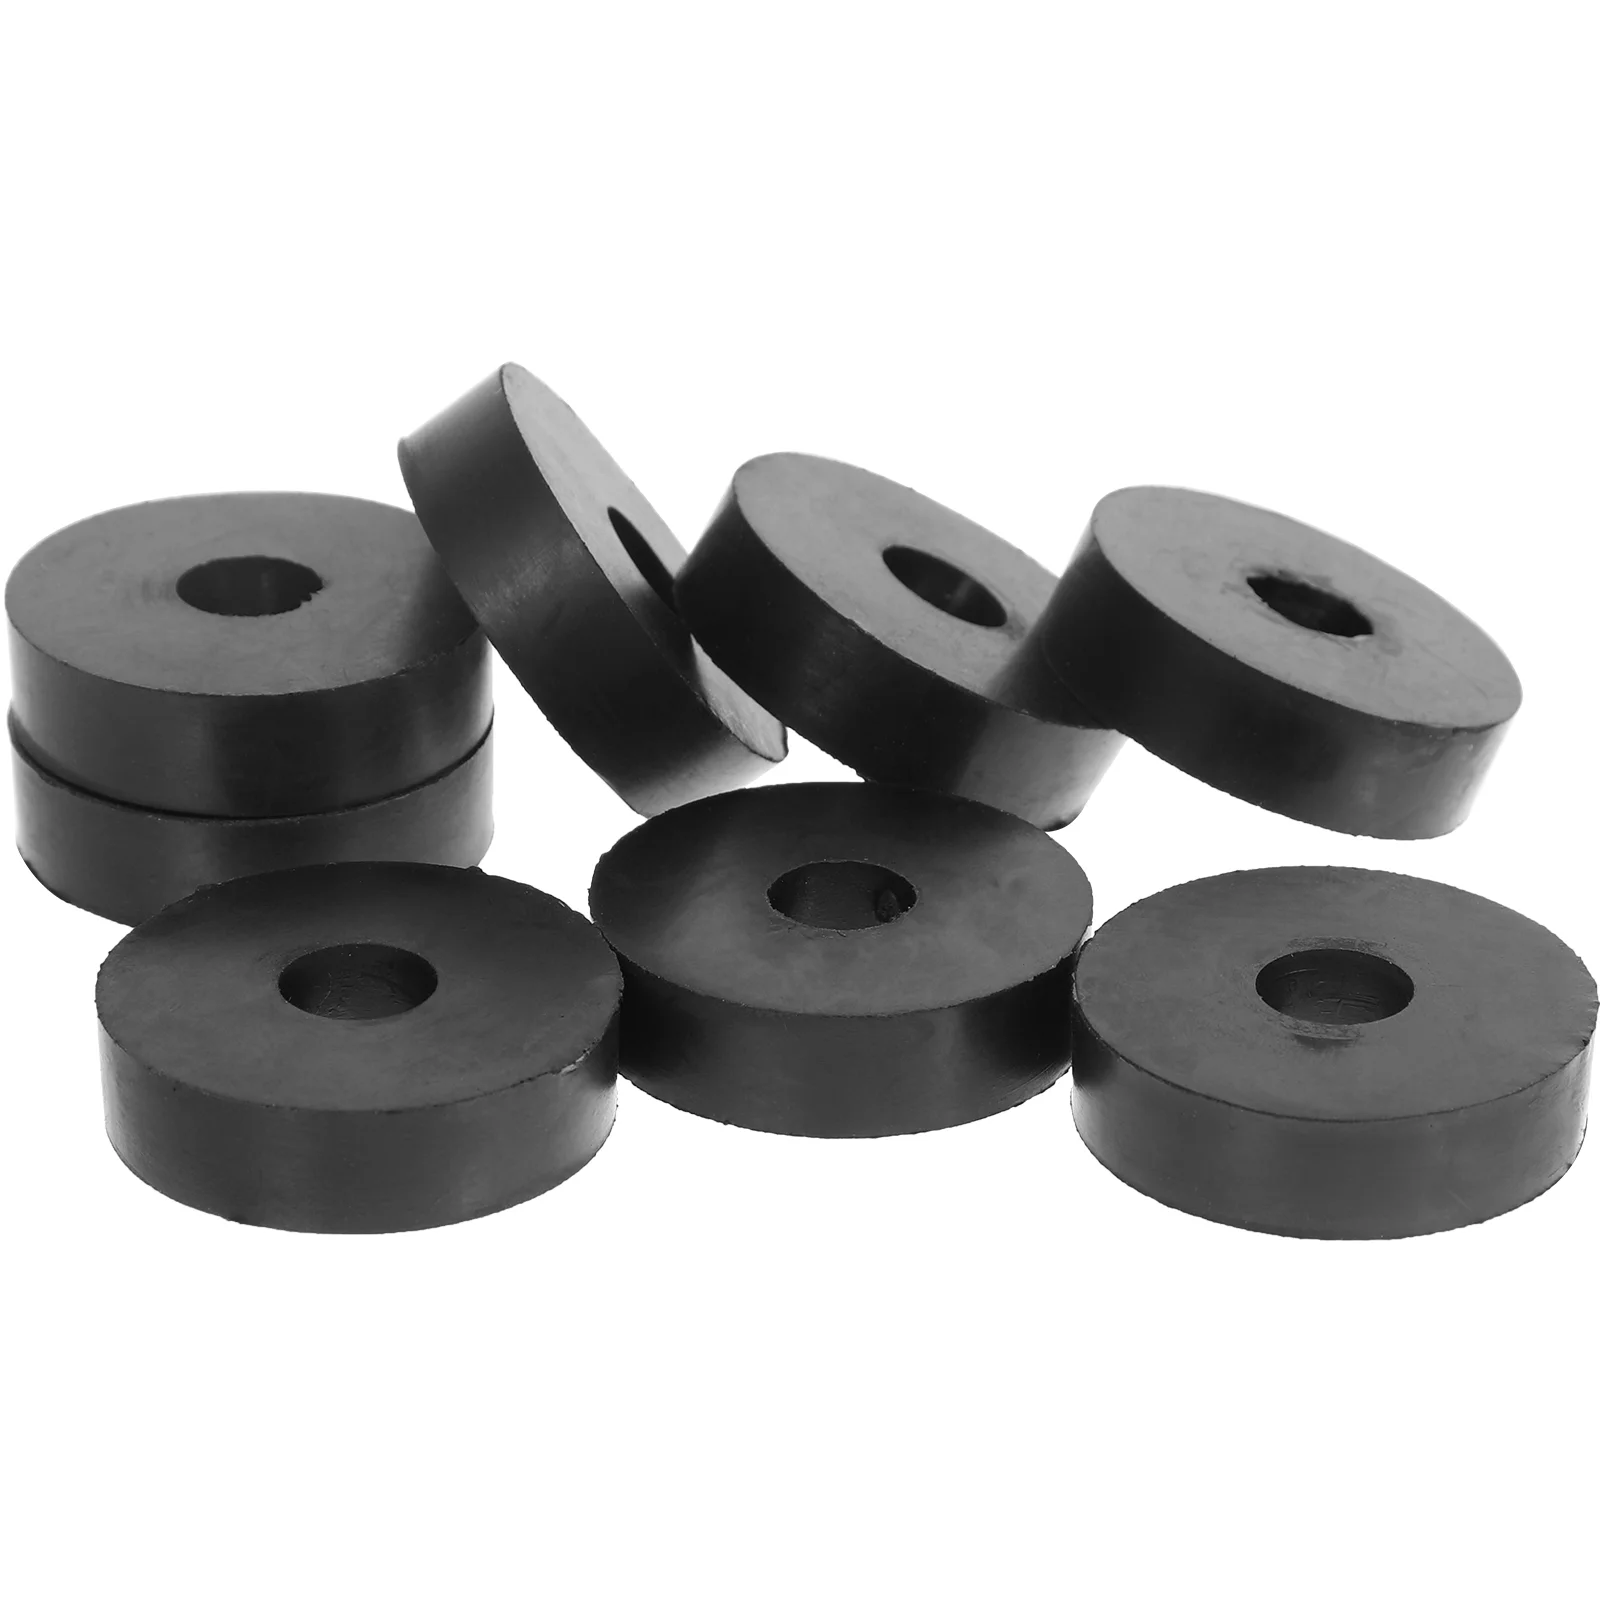 

Rubber Washer Pads Washers Vibration Antimat Grommets Flat Dryer Machine Washing Suppression Stabilizer Absorbing Screws Air